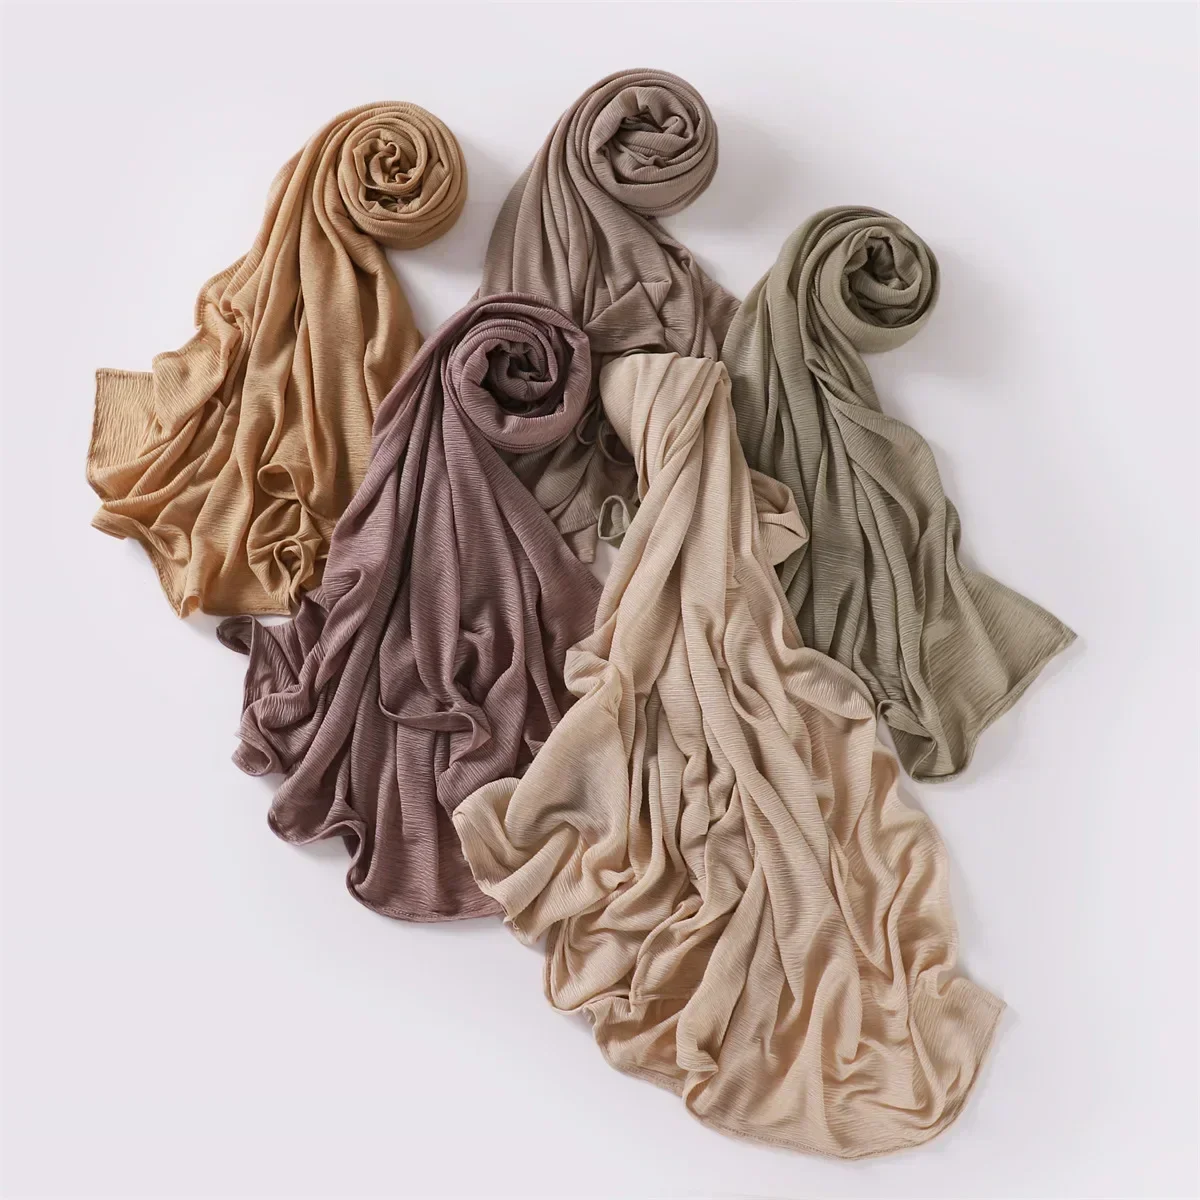 

New Women Scarf For Girls Students Autumn Winter Solid Color Wrinkle Scarves Retro Soft Elastic Fold Shawl Female Wrap Shawls